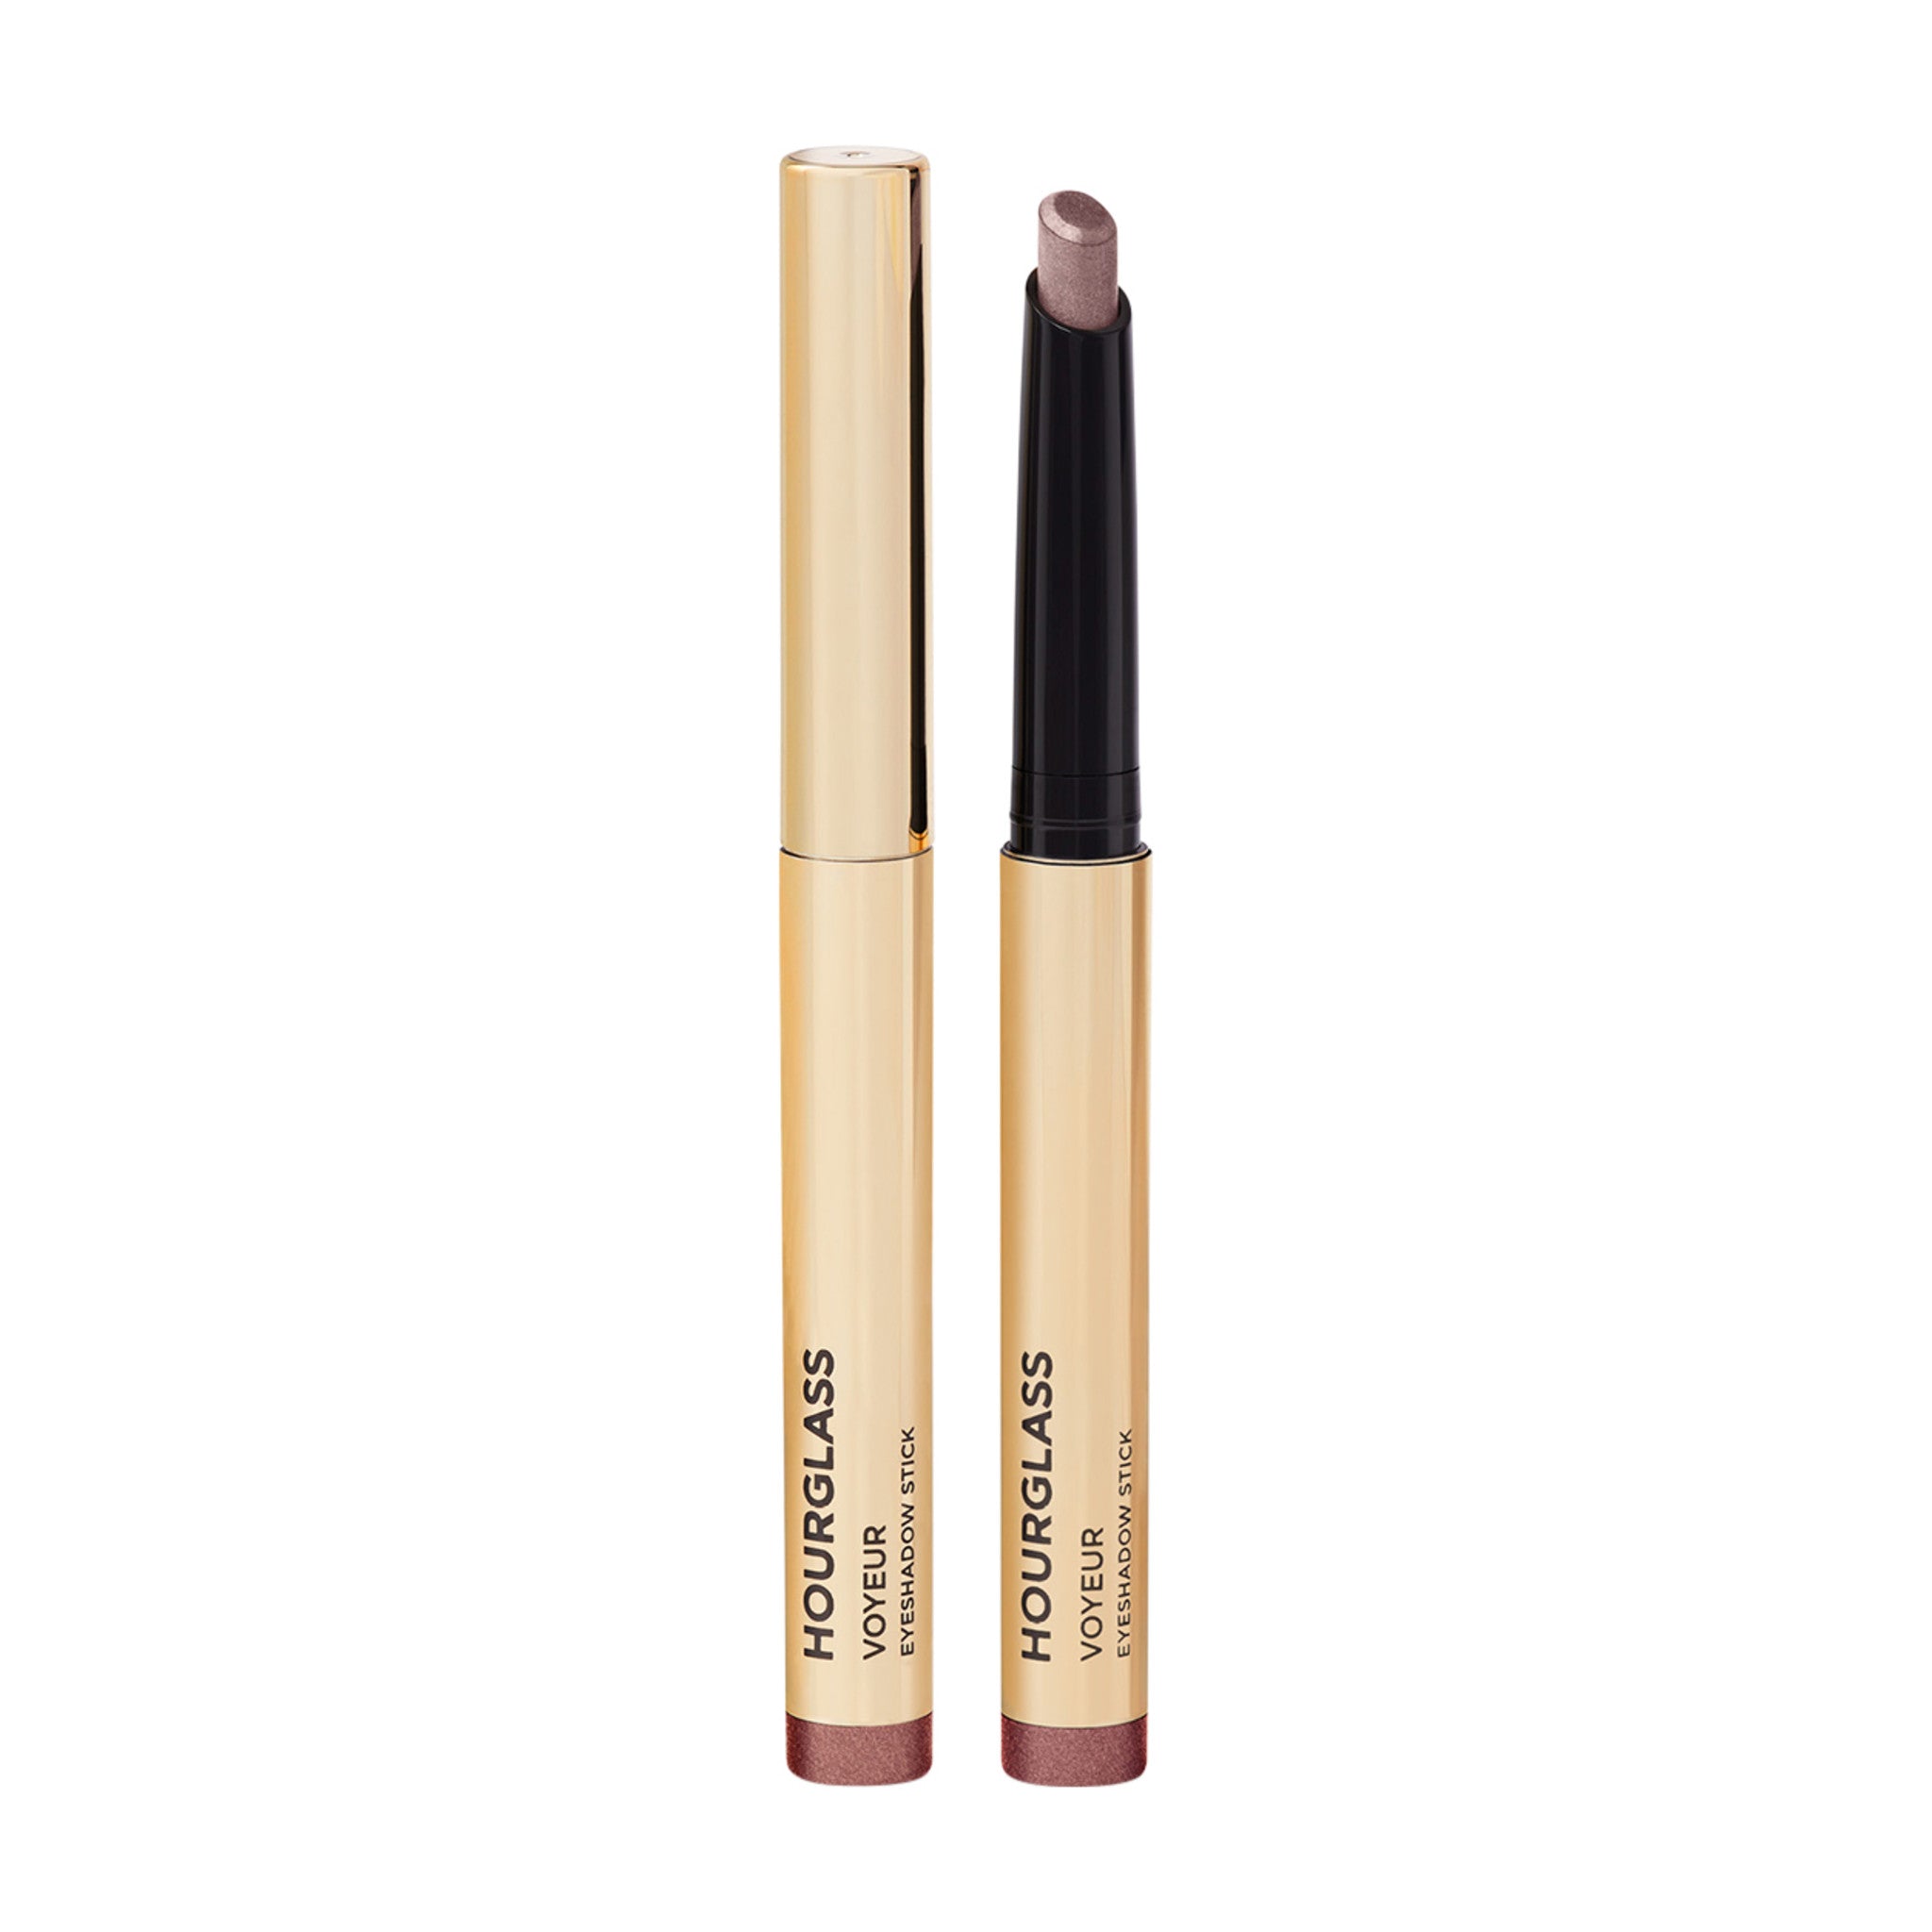 Hourglass Voyeur Eyeshadow Stick Color/Shade variant: Galaxy main image. This product is in the color orange